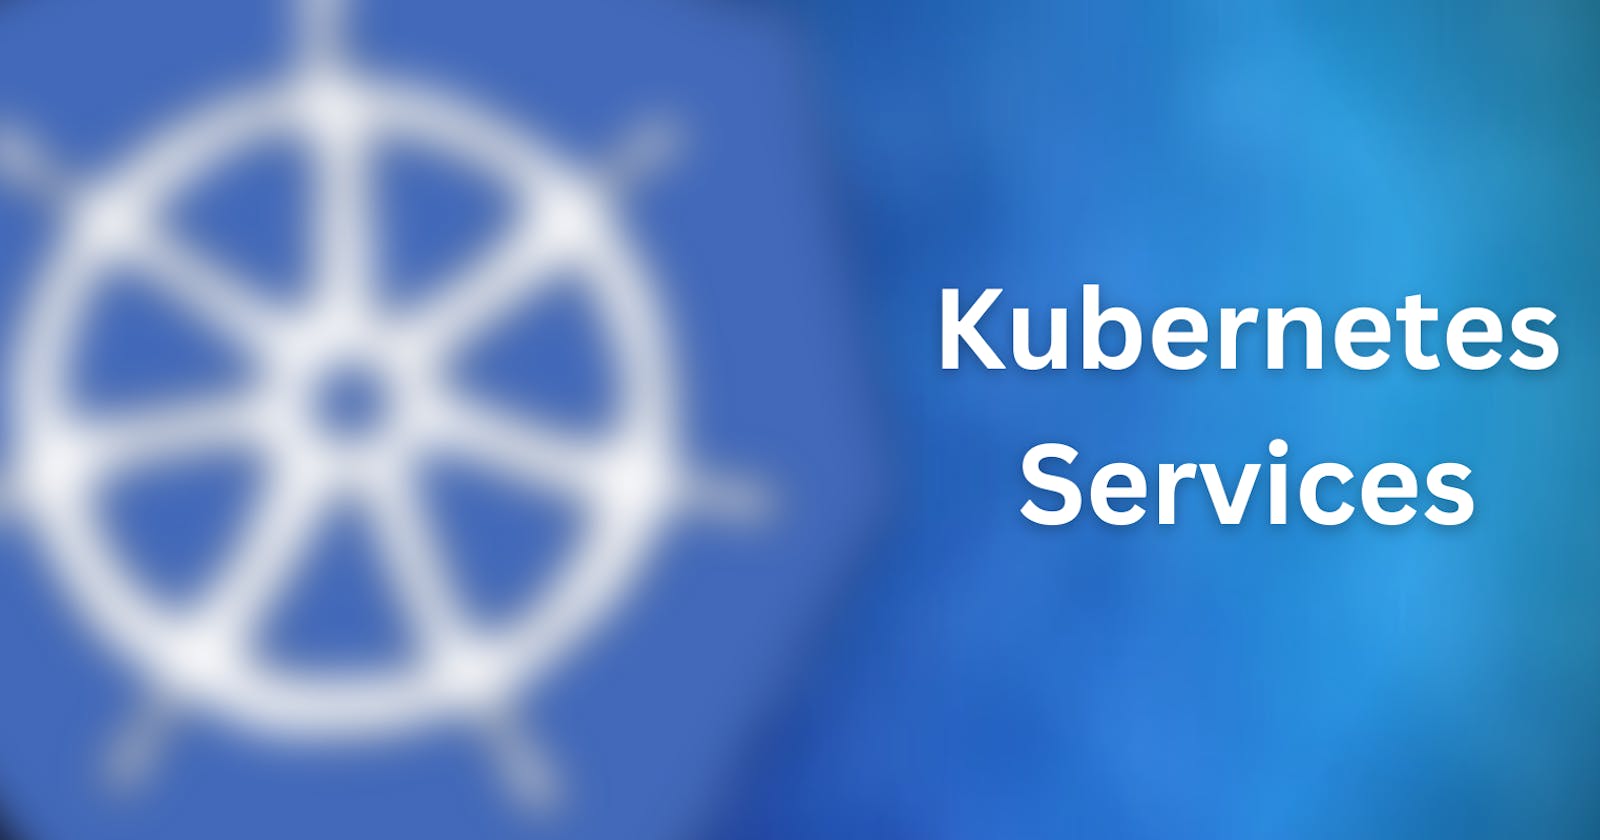 Kubernetes Services - Your way to connect with your application